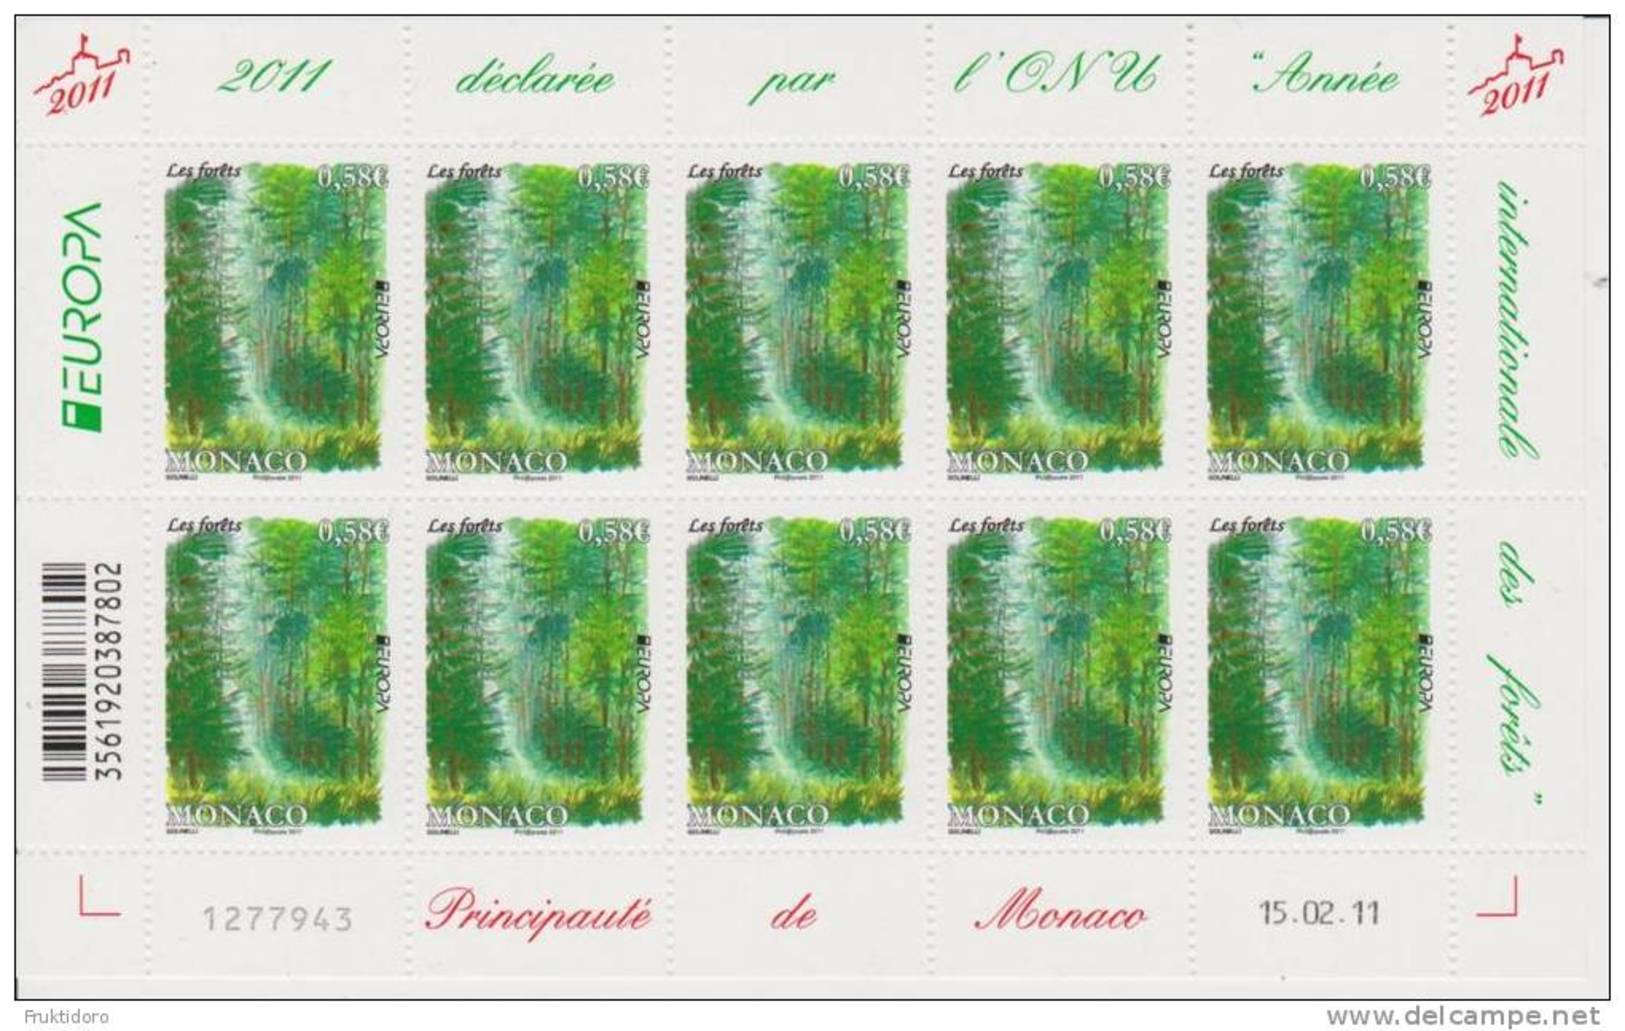 Monaco Mi 3039 Europa - Forests Full Sheet - Feuille * * Alpine Forest - 2011 - Unused Stamps